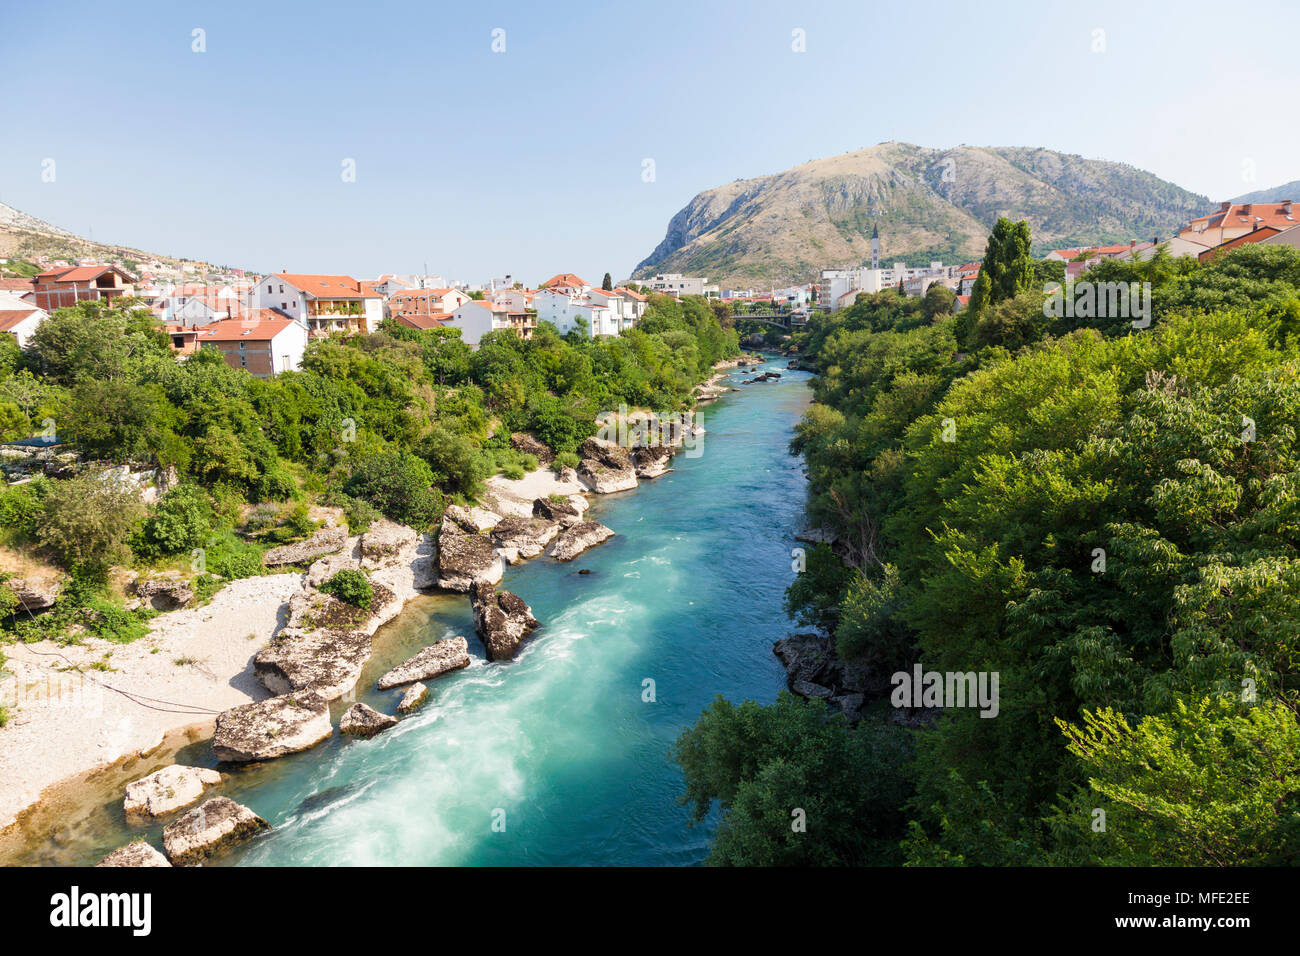 View down the Neretva River towards the mountains in Mostar, Bosnia and Herzegovina Stock Photo